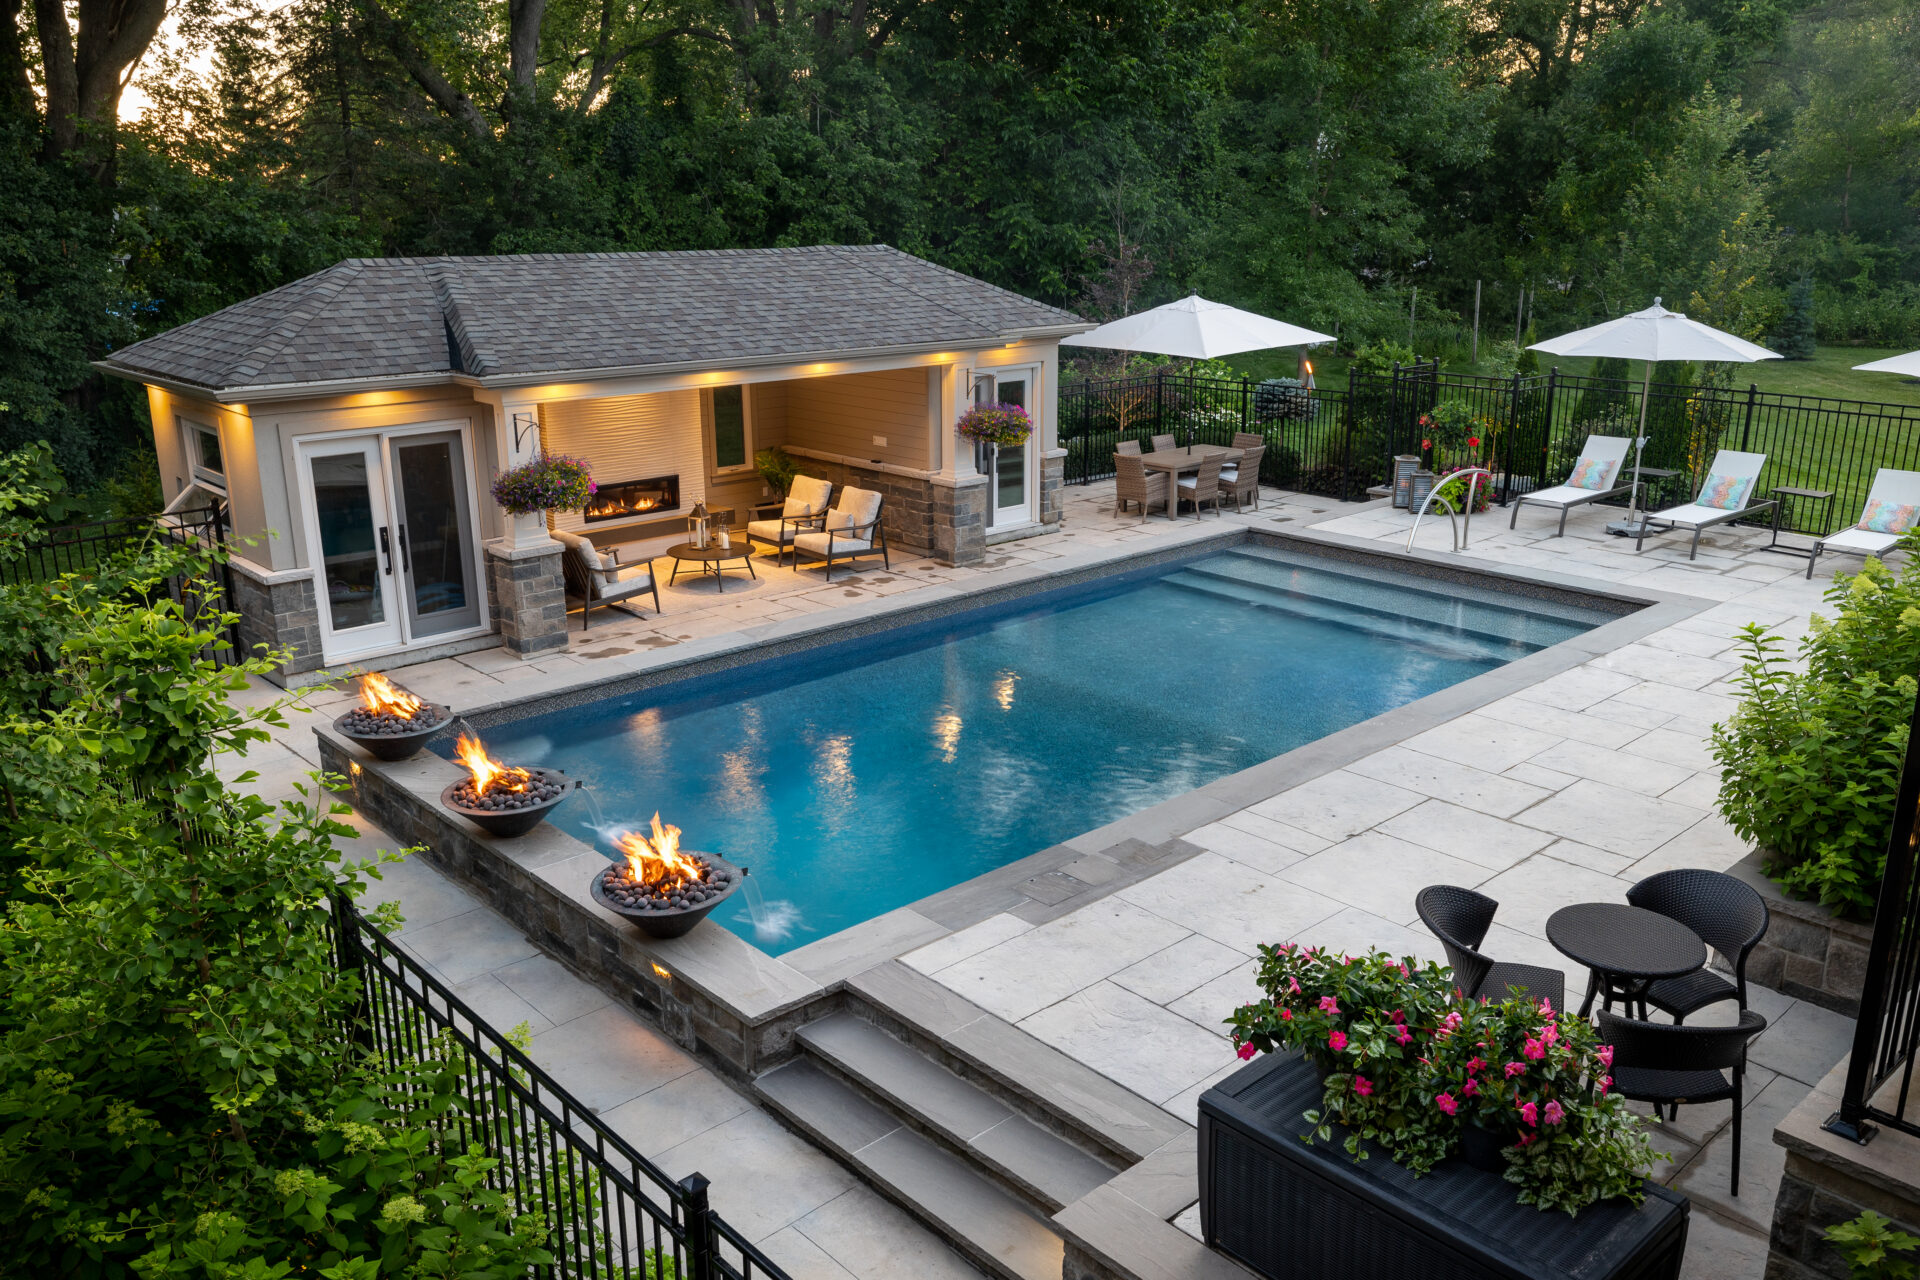 An upscale backyard features a pool, patio with seating and dining areas, umbrellas, greenery, and lit fire bowls at dusk.